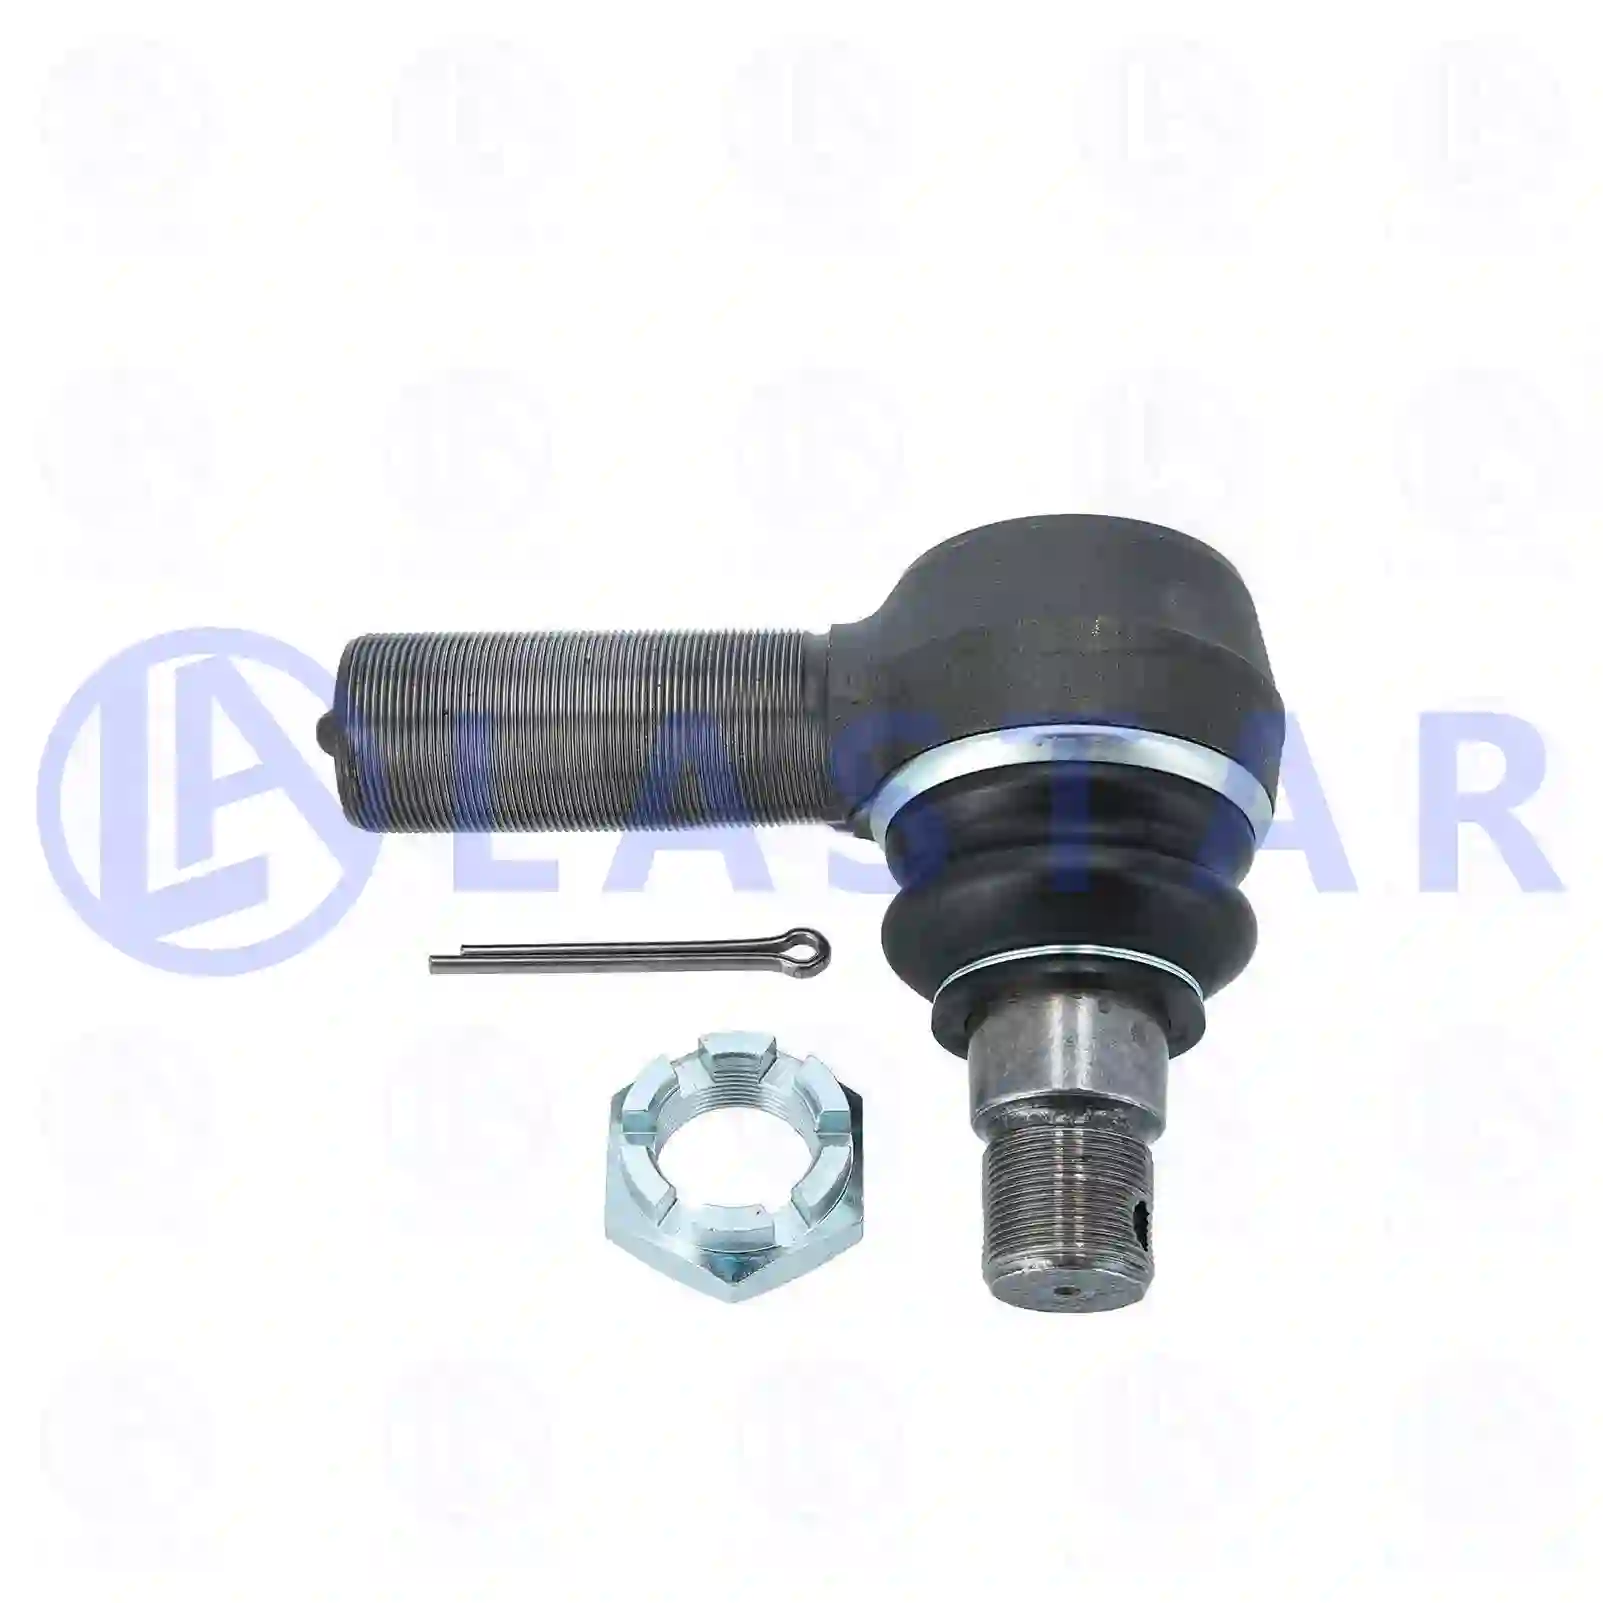 Ball joint, right hand thread, 77705372, 00101347, 00113251, 98133359, 0218081200, 634303130, 0697221, 697221, F4560S, 8408377, 99707030168, 99708408377, 01686516, 81953016295, 81953016297, 0004601748, 120322305, 53X001A, 2205000400, 6851491000, 5605300511, ZG40392-0008 ||  77705372 Lastar Spare Part | Truck Spare Parts, Auotomotive Spare Parts Ball joint, right hand thread, 77705372, 00101347, 00113251, 98133359, 0218081200, 634303130, 0697221, 697221, F4560S, 8408377, 99707030168, 99708408377, 01686516, 81953016295, 81953016297, 0004601748, 120322305, 53X001A, 2205000400, 6851491000, 5605300511, ZG40392-0008 ||  77705372 Lastar Spare Part | Truck Spare Parts, Auotomotive Spare Parts